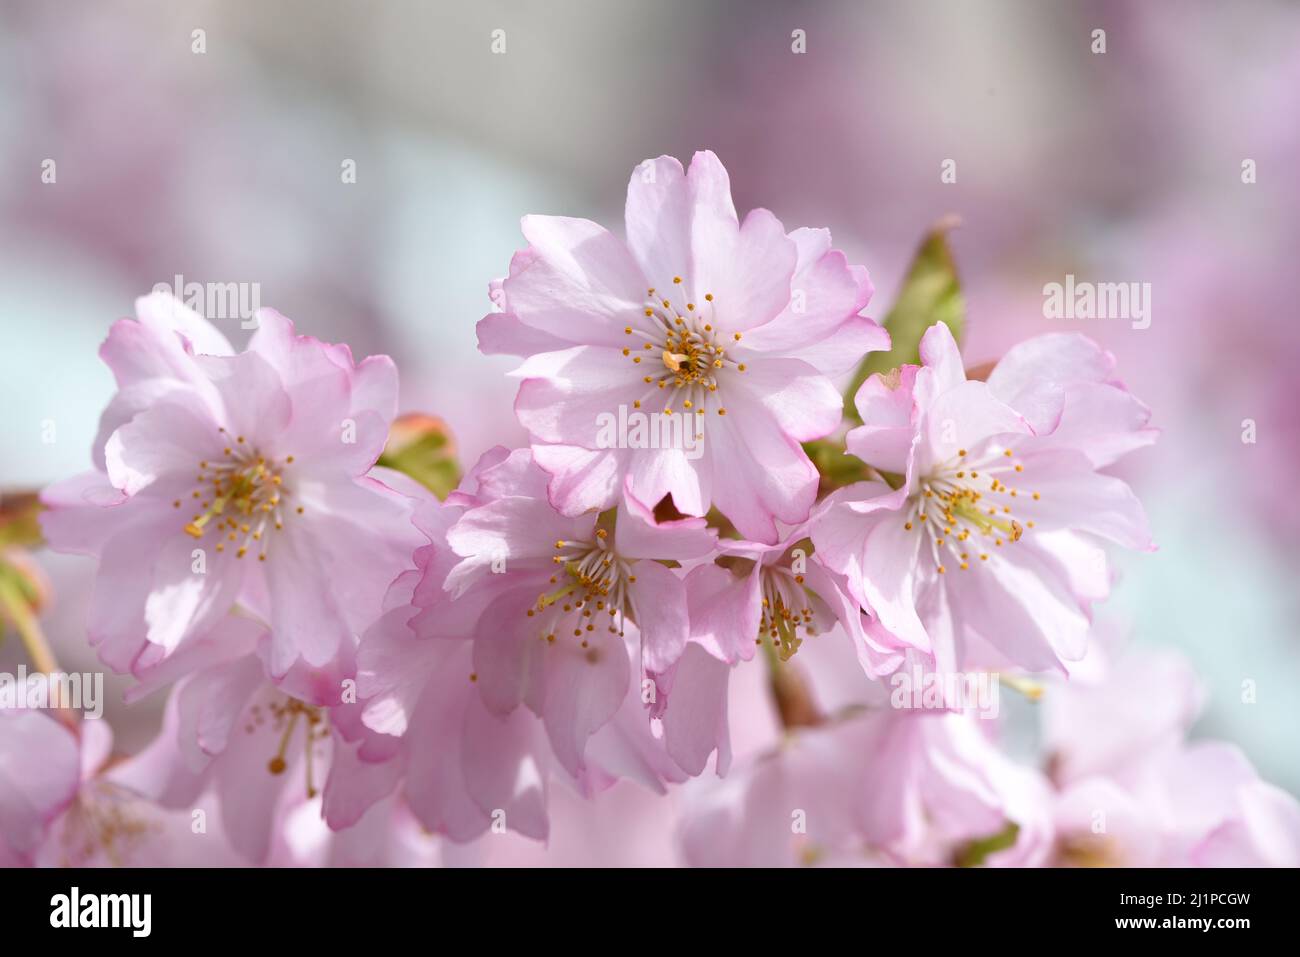 A sure sign of spring, pink cherry blossom flowers on a tree on a street in Victoria, Britsih Columbia, Canada on Vancouver island. Stock Photo